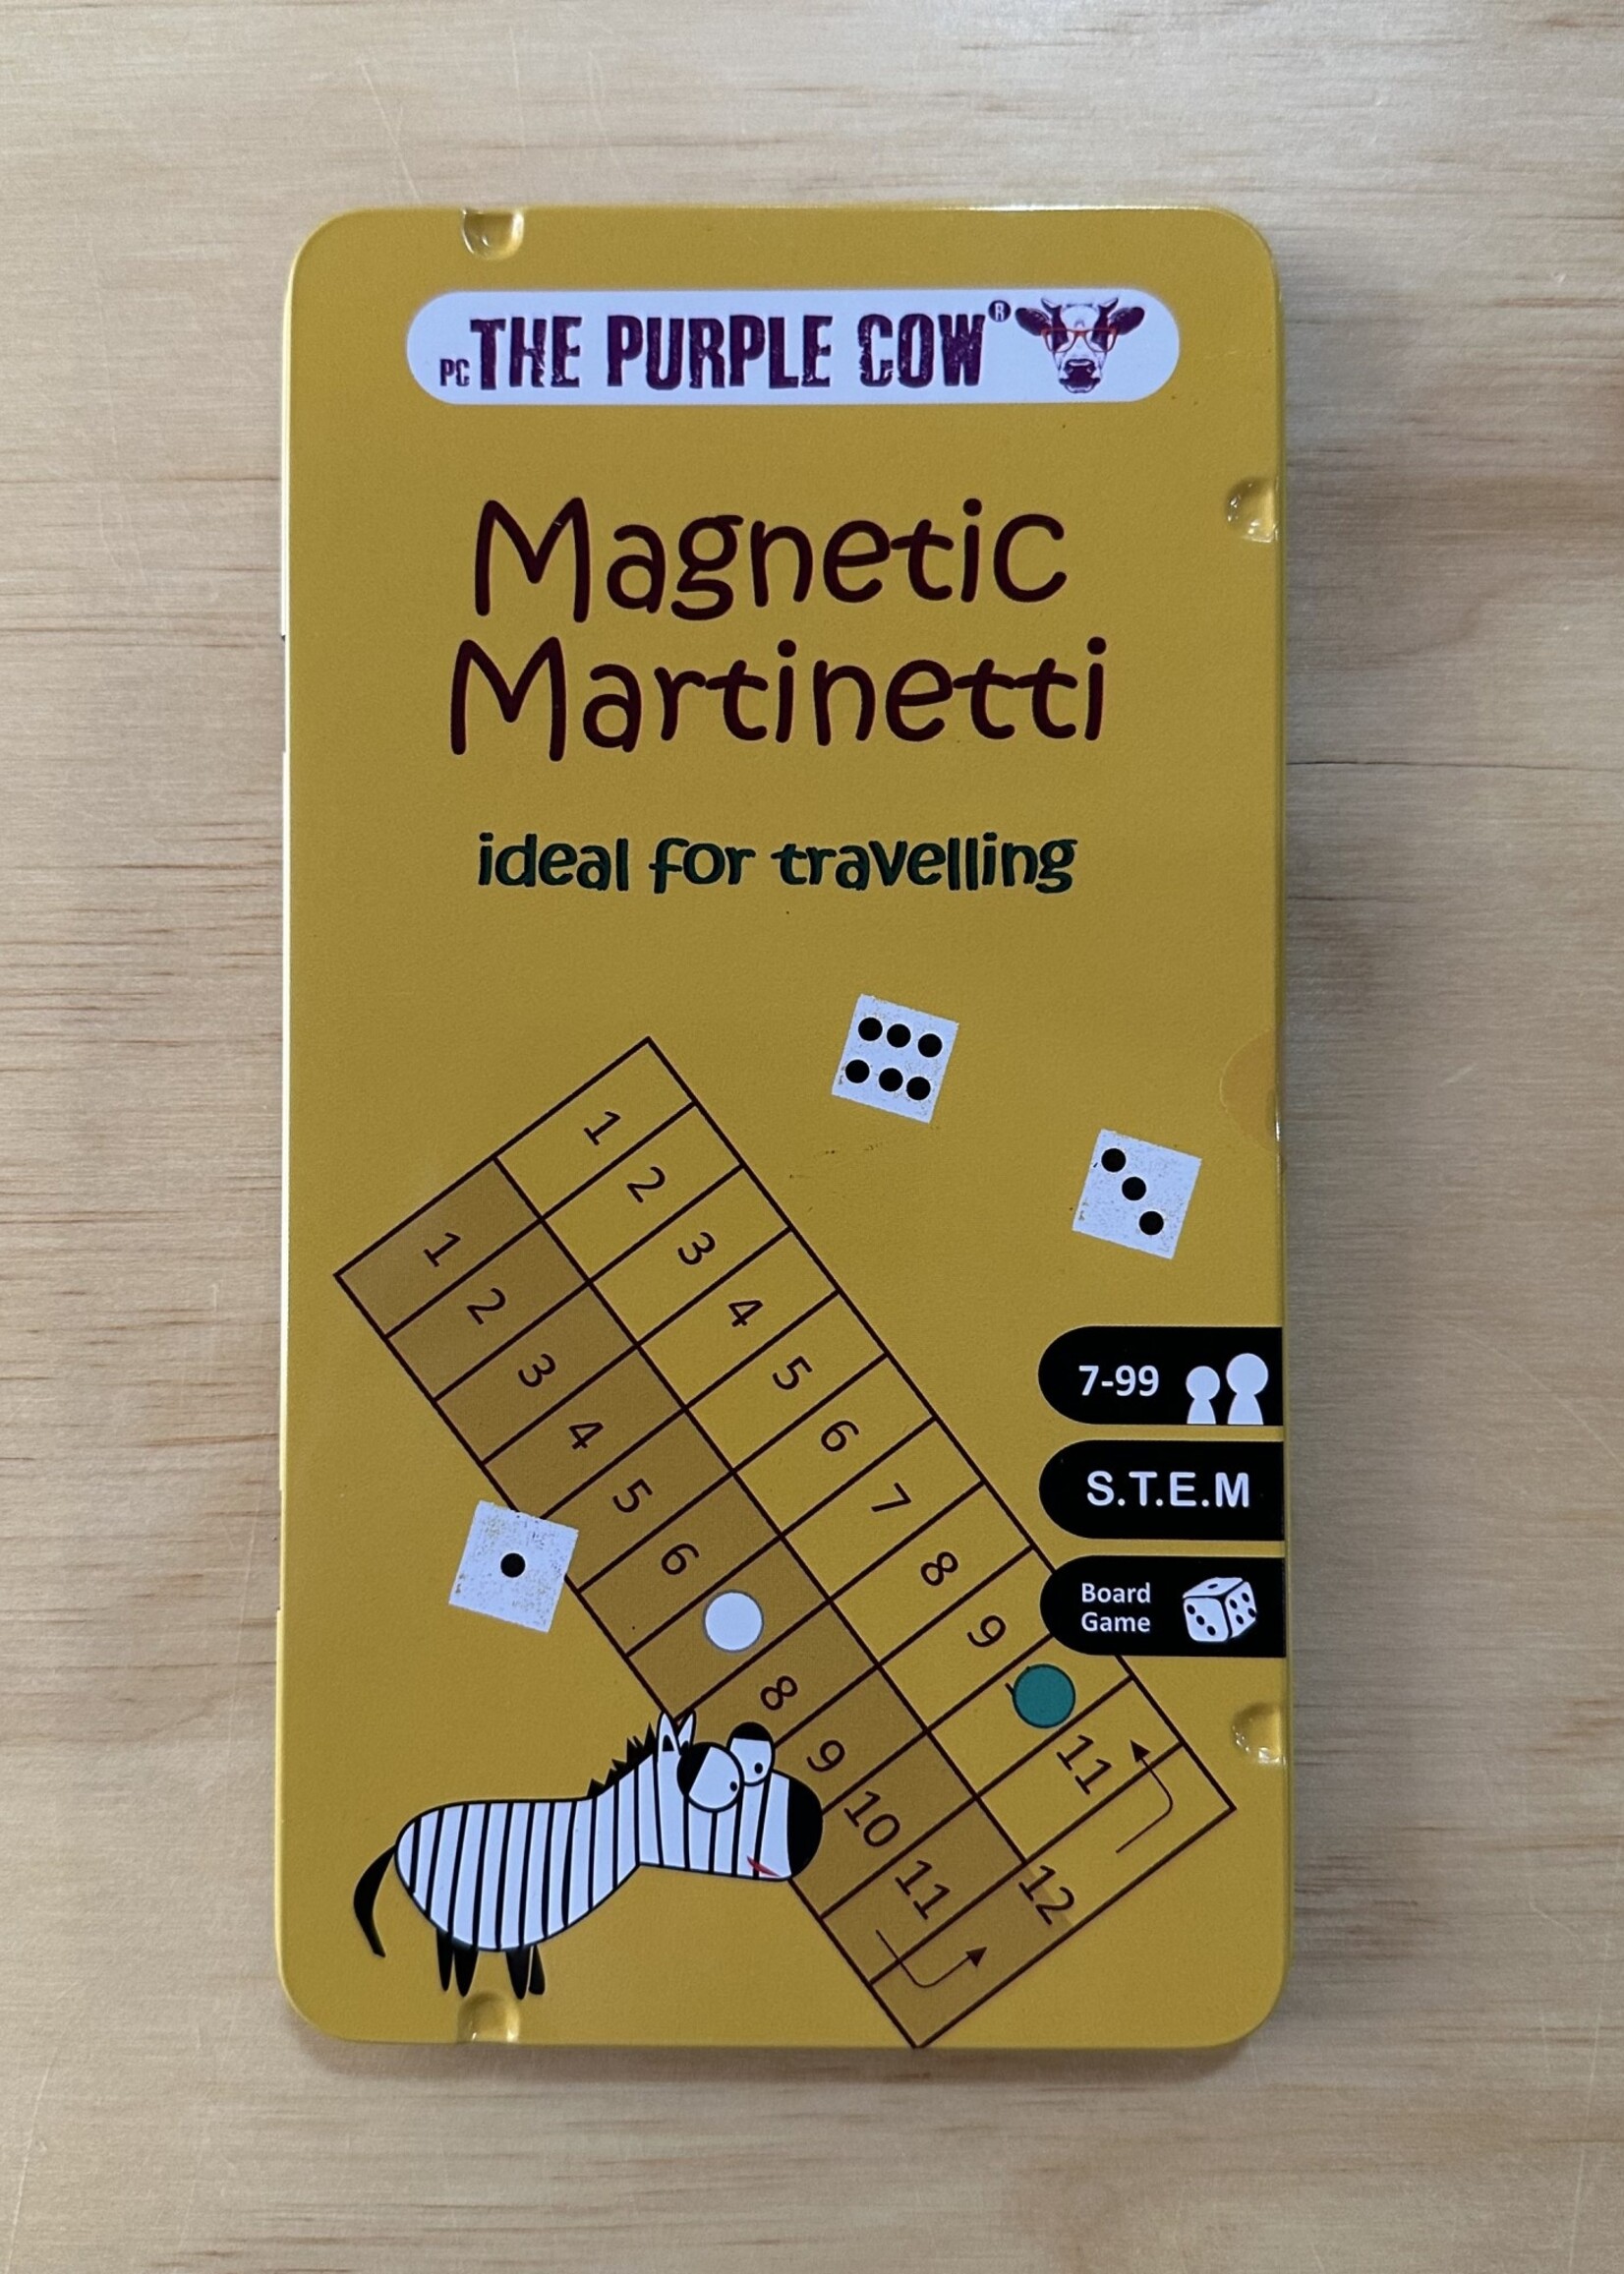 Travel Game - Magnetic Martinetti